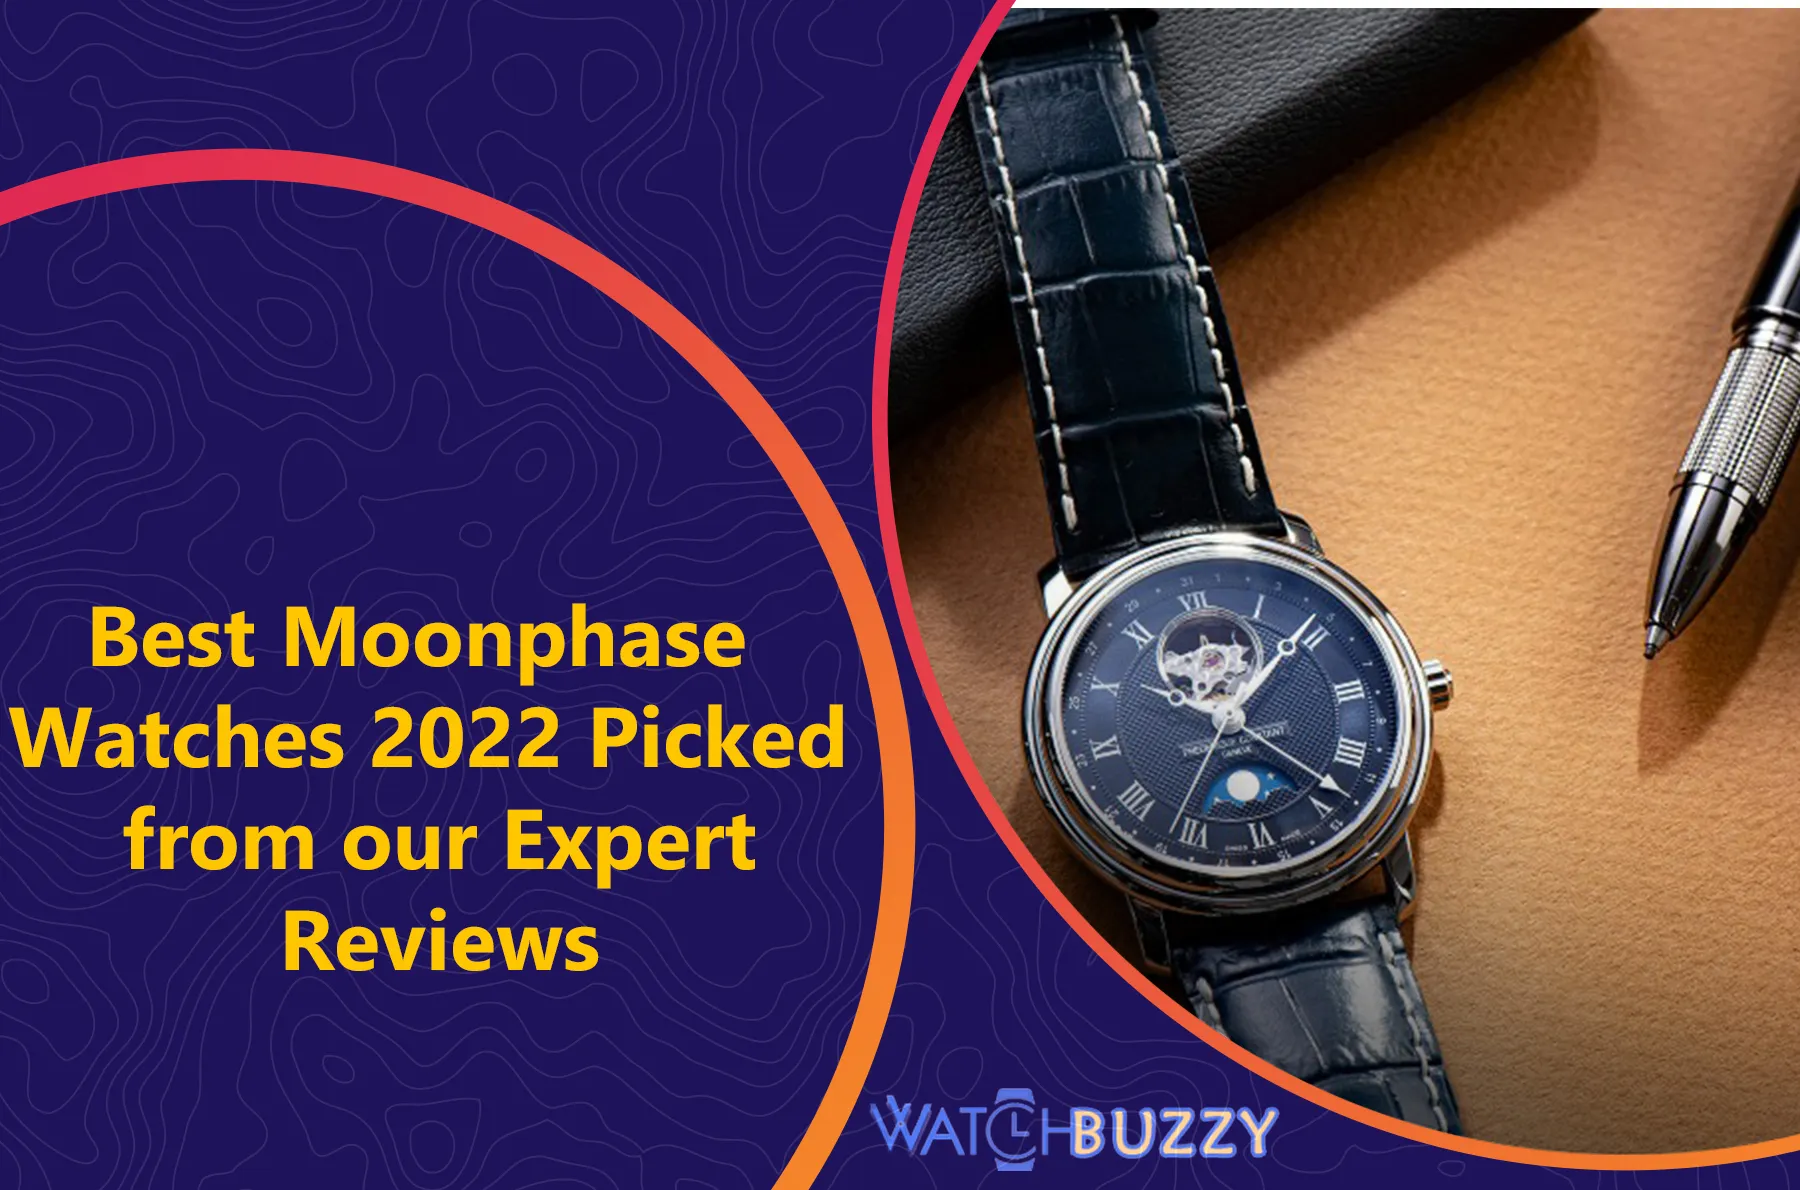 Best Moonphase Watches 2022 Picked from our Expert Reviews